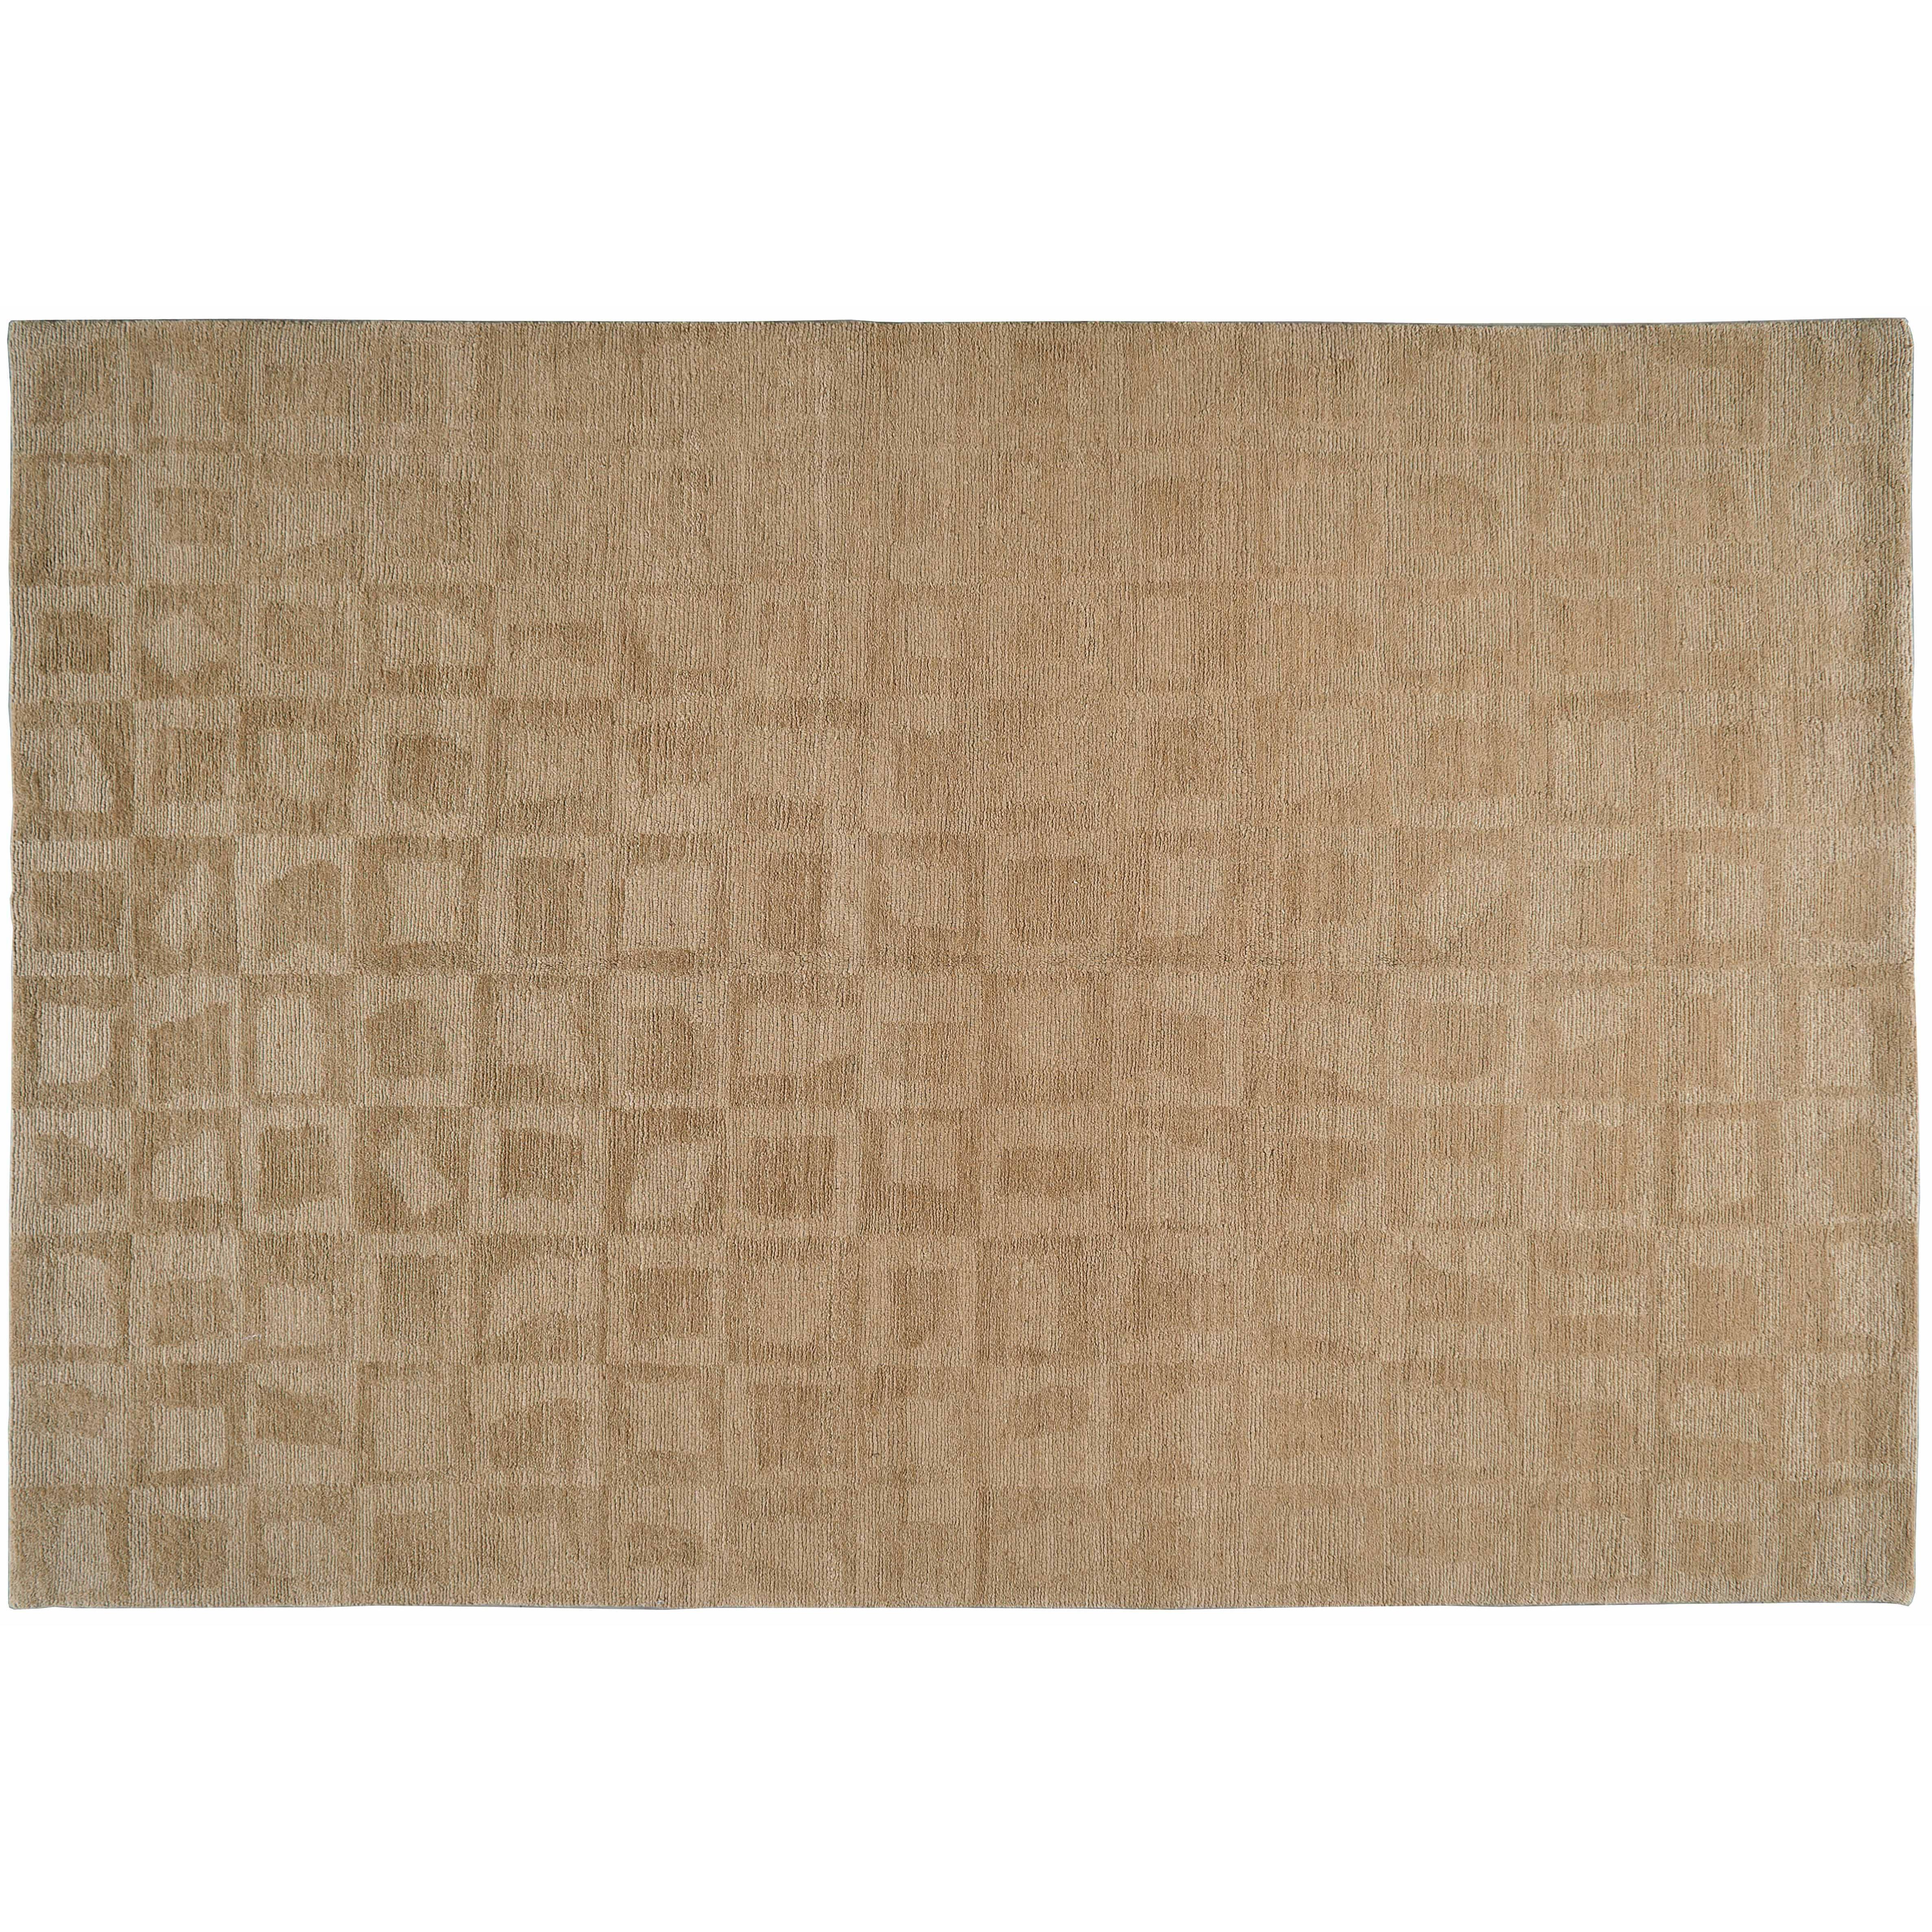 Tone on Tone Rug with Square Details